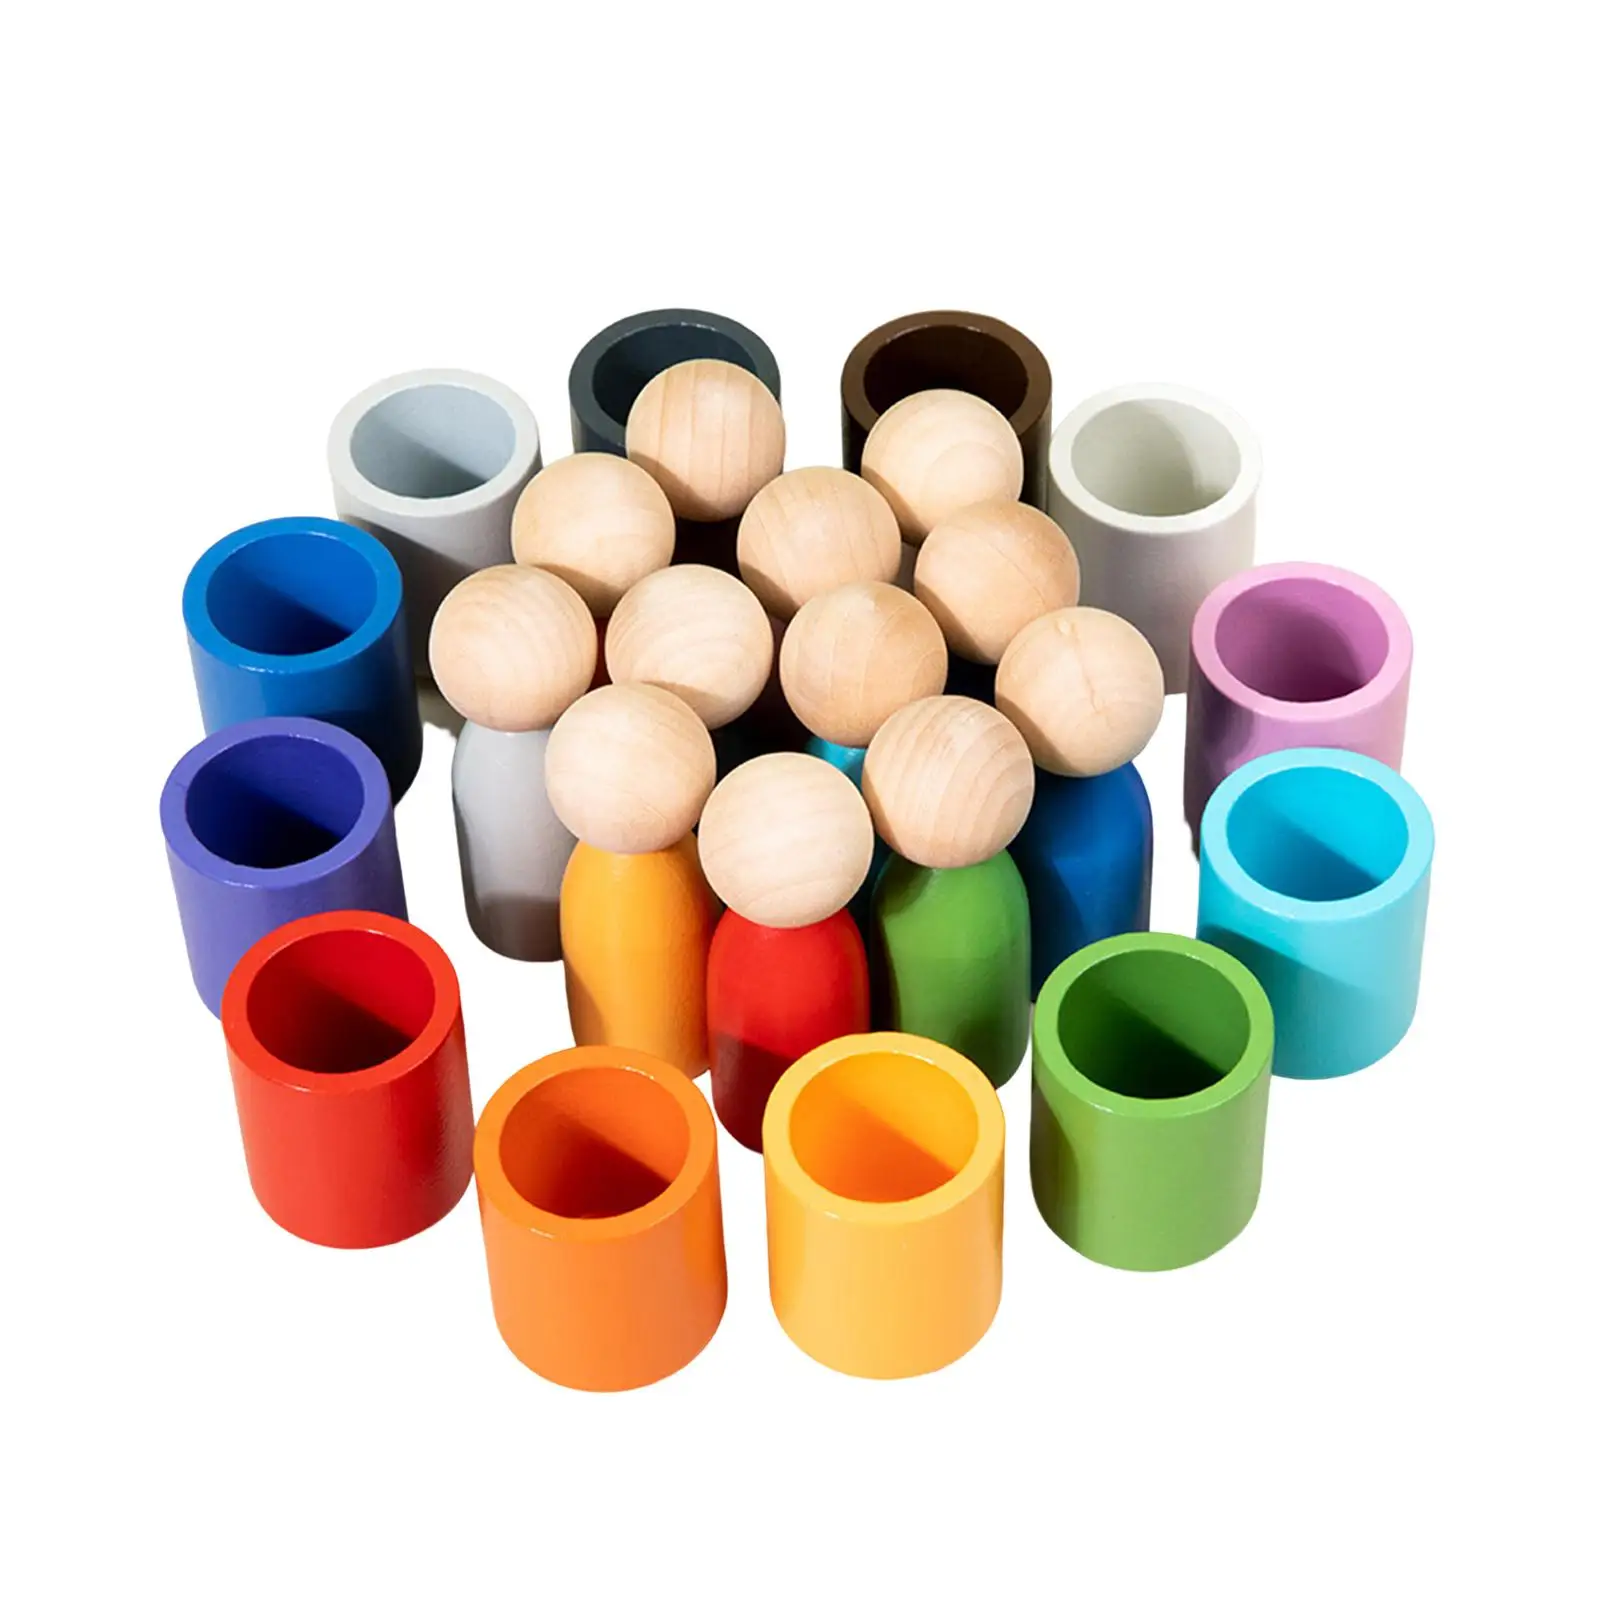 Wooden Sorter Game Sensory Toys Color Sorting Peg Dolls Wooden Peg Dolls in Cups for Girls Kids Toddlers Children Birthday Gifts